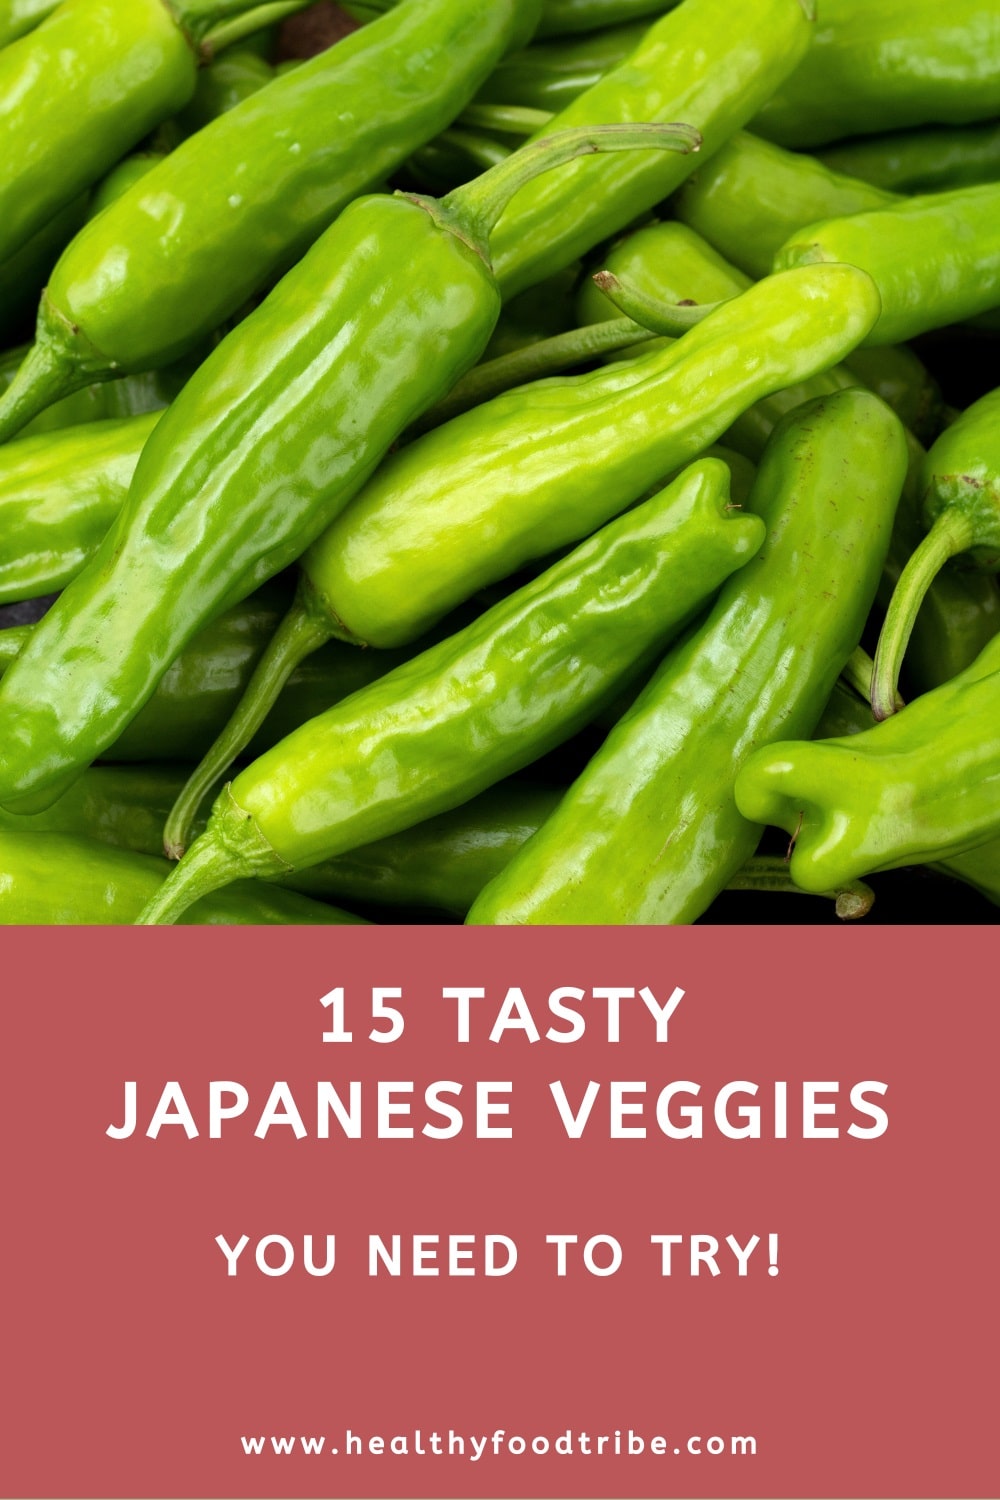 15 Tasty Japanese veggies you need to try